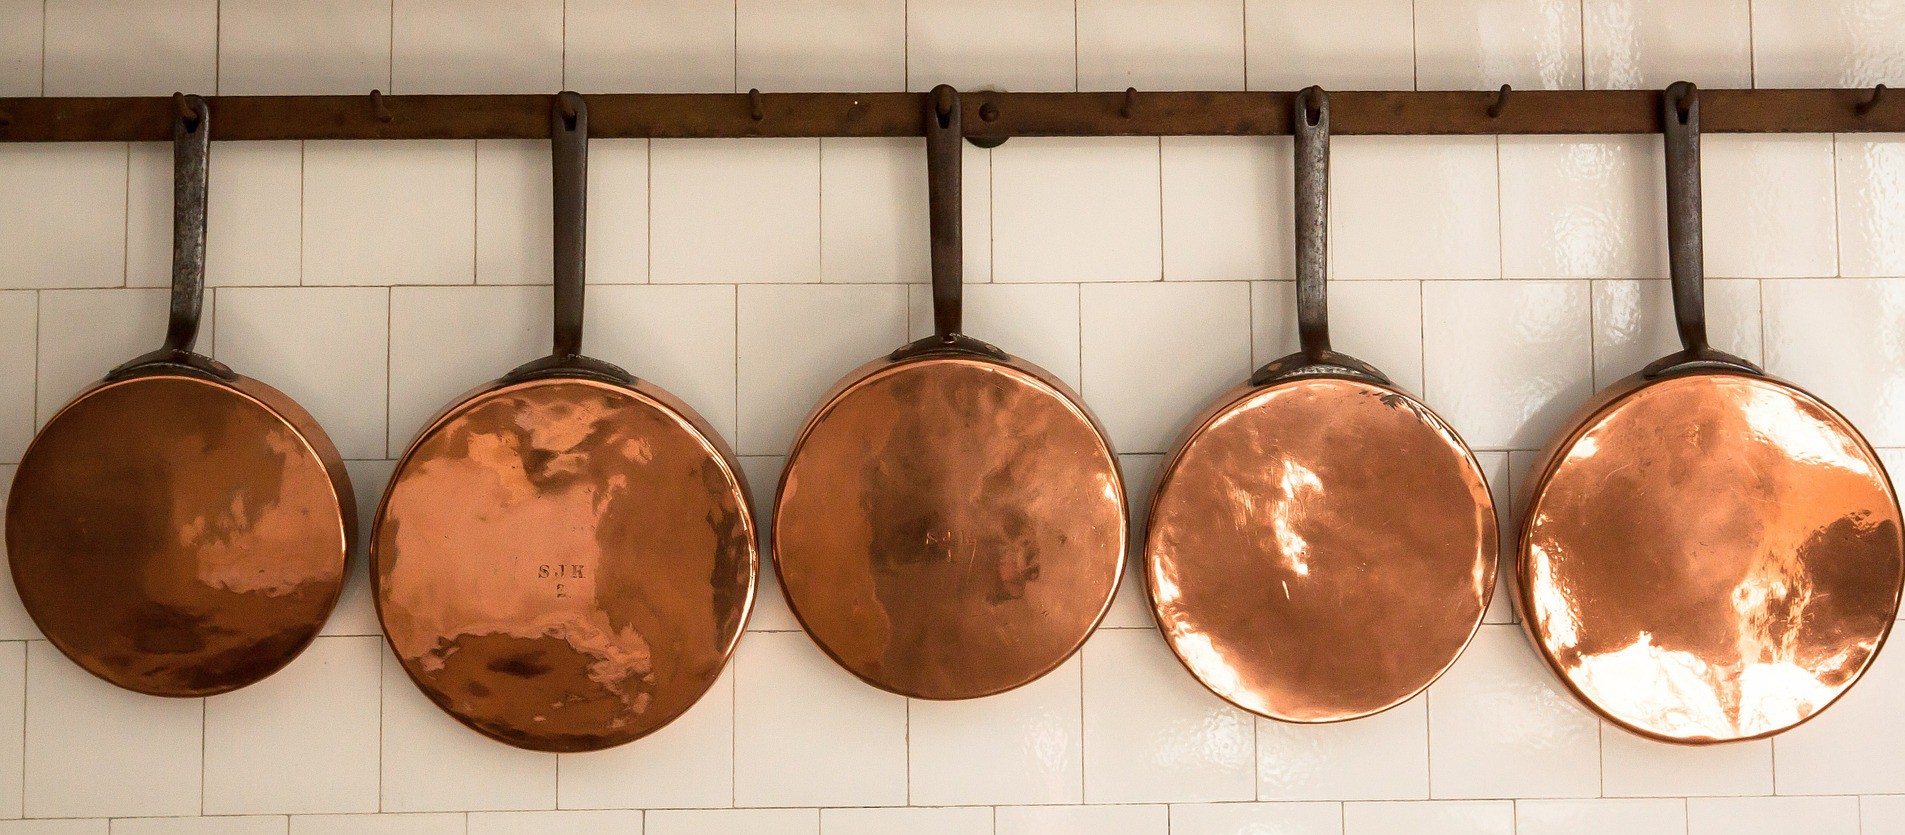 Pots and Pans neatly line the kitchen shelves